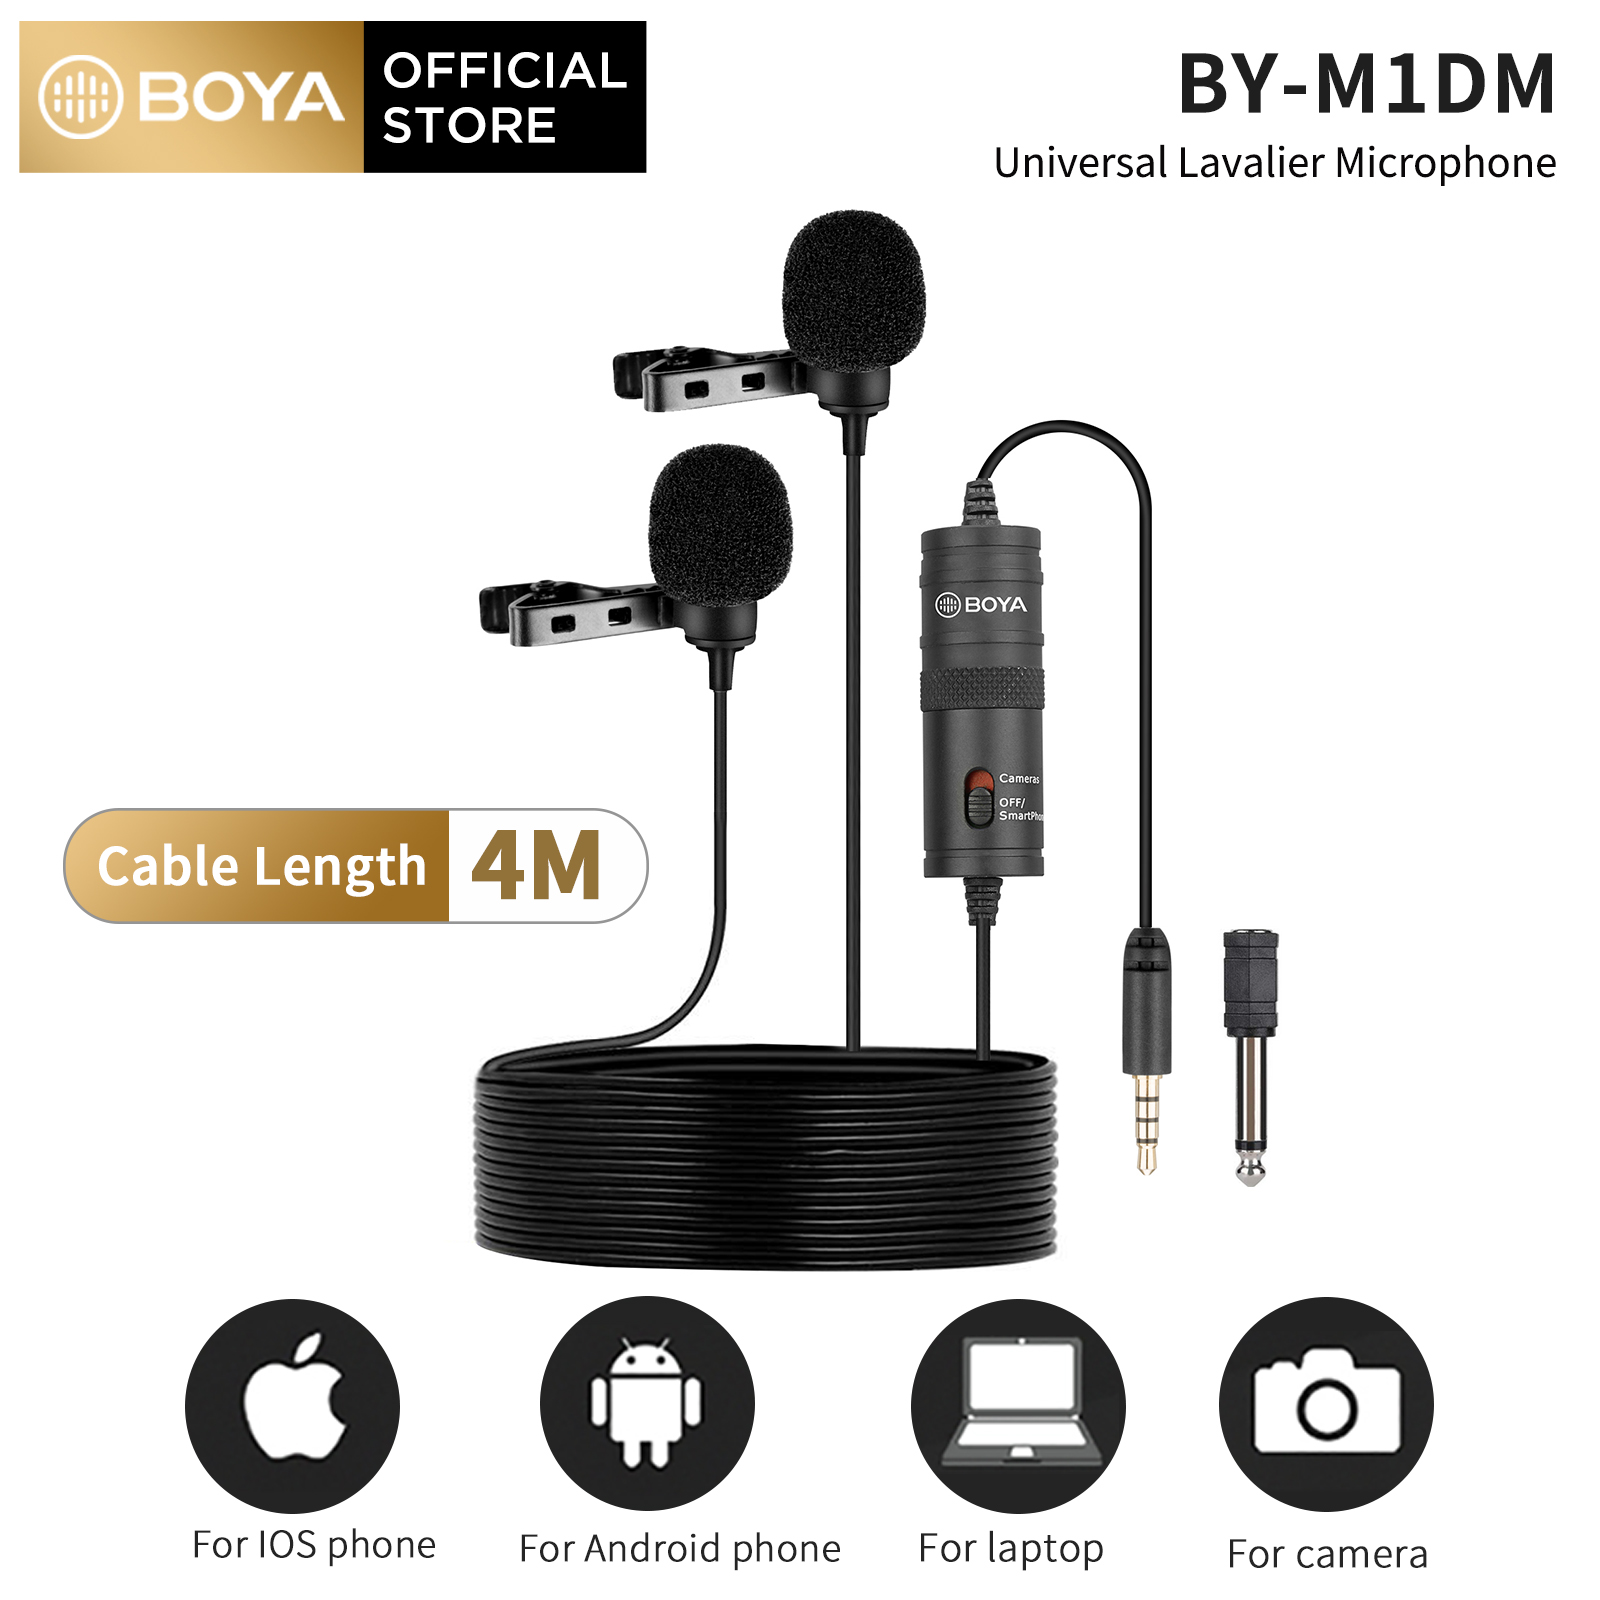 Smartphones,　Video　Pro　Recording　Camcorders,　Lavalier　Clip-on　BY-M1　Omnidirectional　iPhone　Vlogging　Youtube　Lazada　M1DM　Microphone　Mic　PC　Lapel　for　ASMR　Android　Original　Livestream　PH　BOYA　DSLRs,